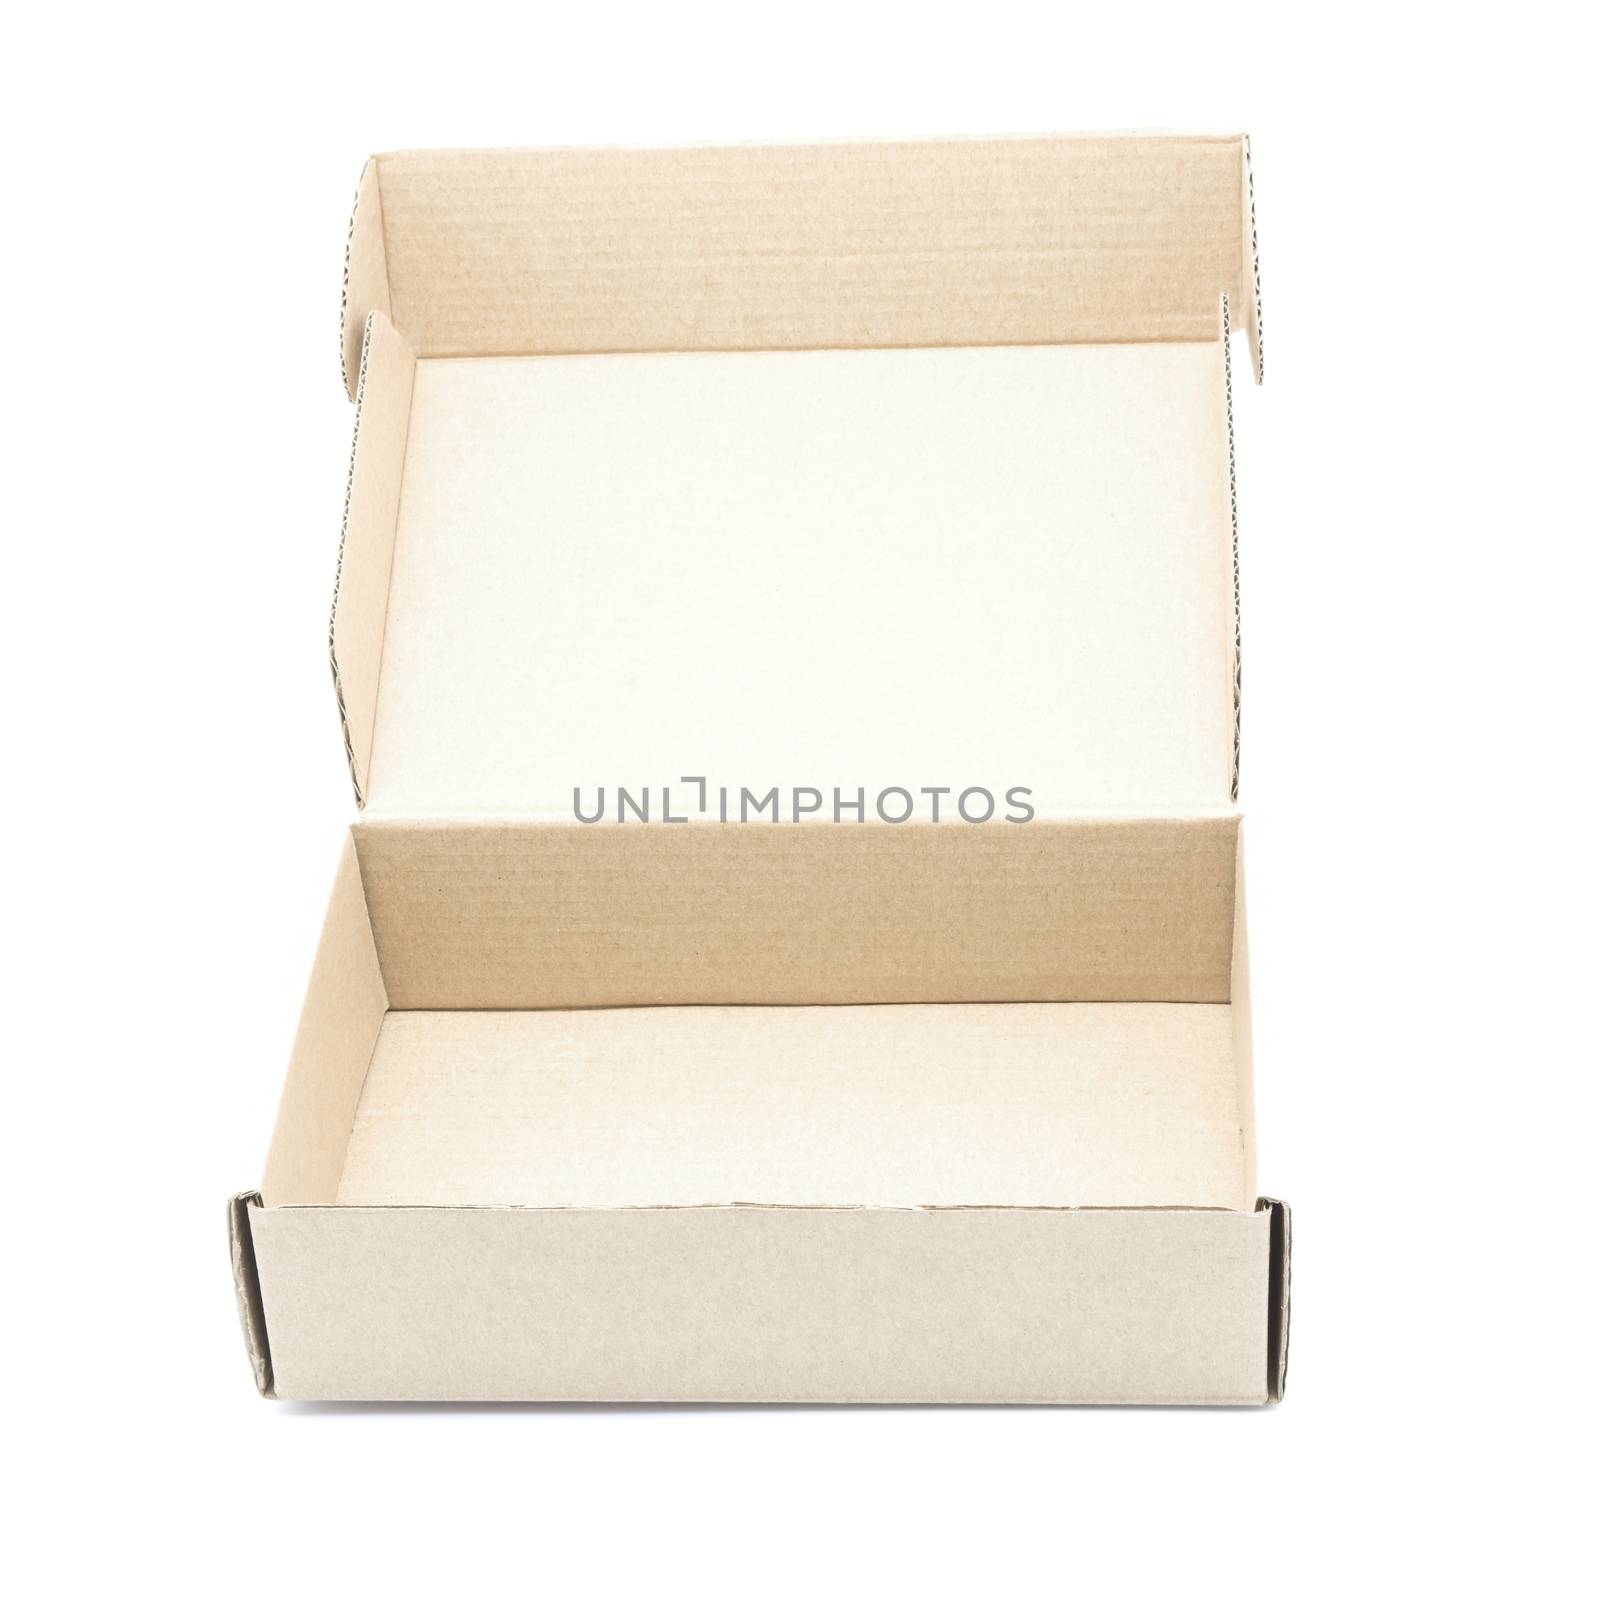 Recycle cardboard box package, open inside view, isolated on white background